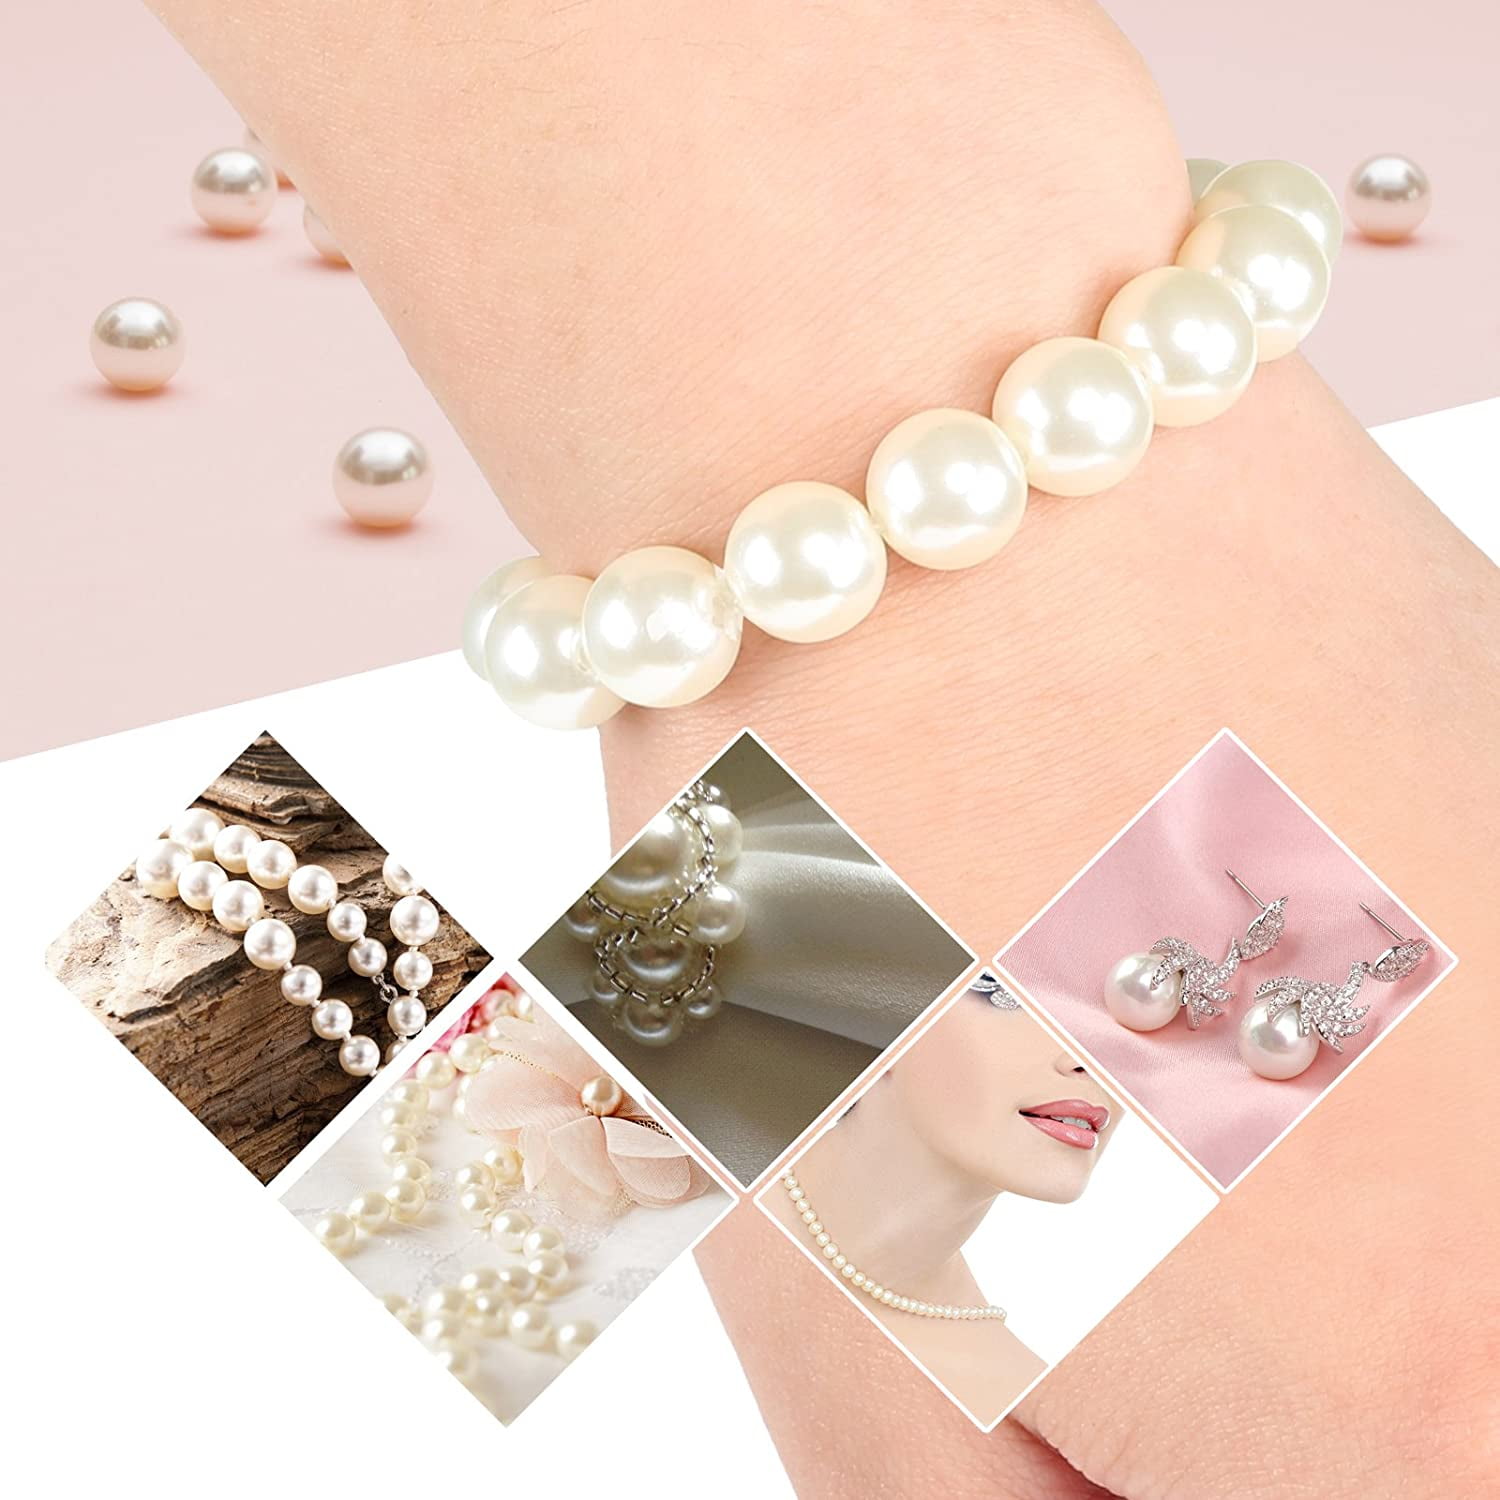 keusn white flat back pearl half round pearls beads satin luster loose beads  gems for diy craft necklaces bracelets jewelry decorations wedding dress  nail arts making 